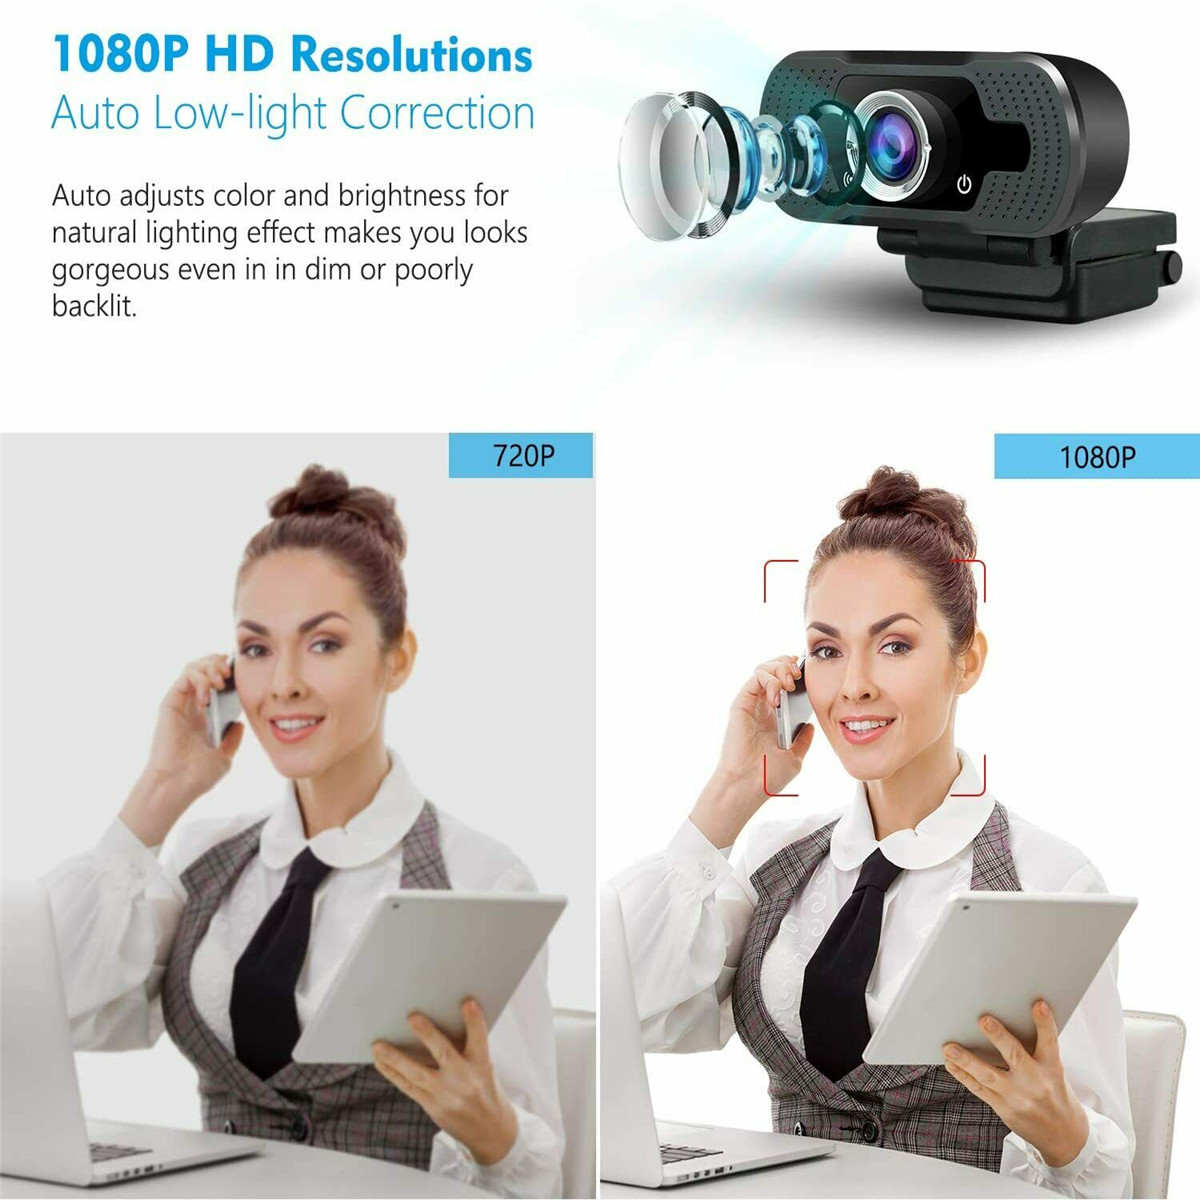 U4-N-HD-1080P-110deg-Wide-Angle-Auto-focus-USB-Webcam-Conference-Live-Computer-Camera-Built-in-Noise-1690165-3